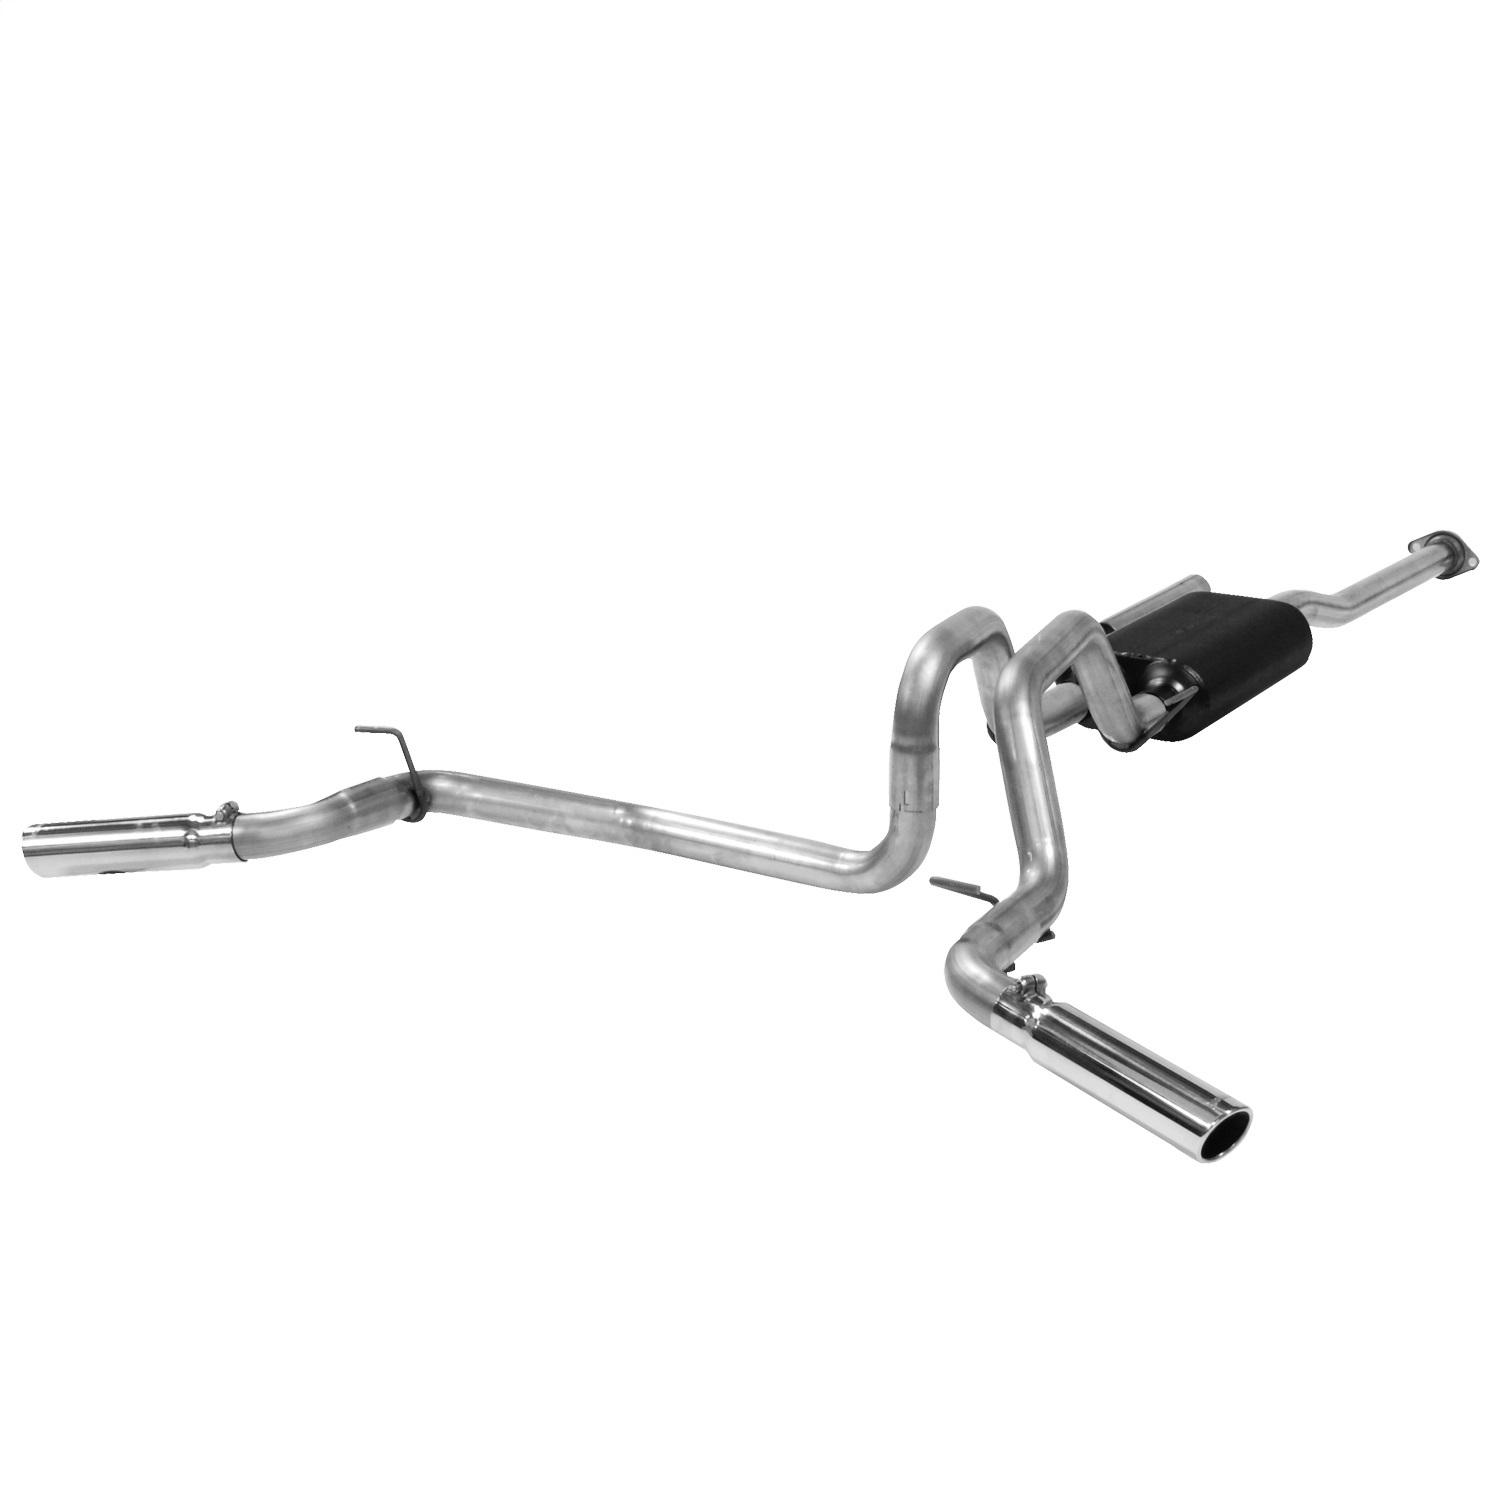 Flowmaster Flowmaster 817432 American Thunder Cat Back Exhaust System Fits 05-13 Tacoma